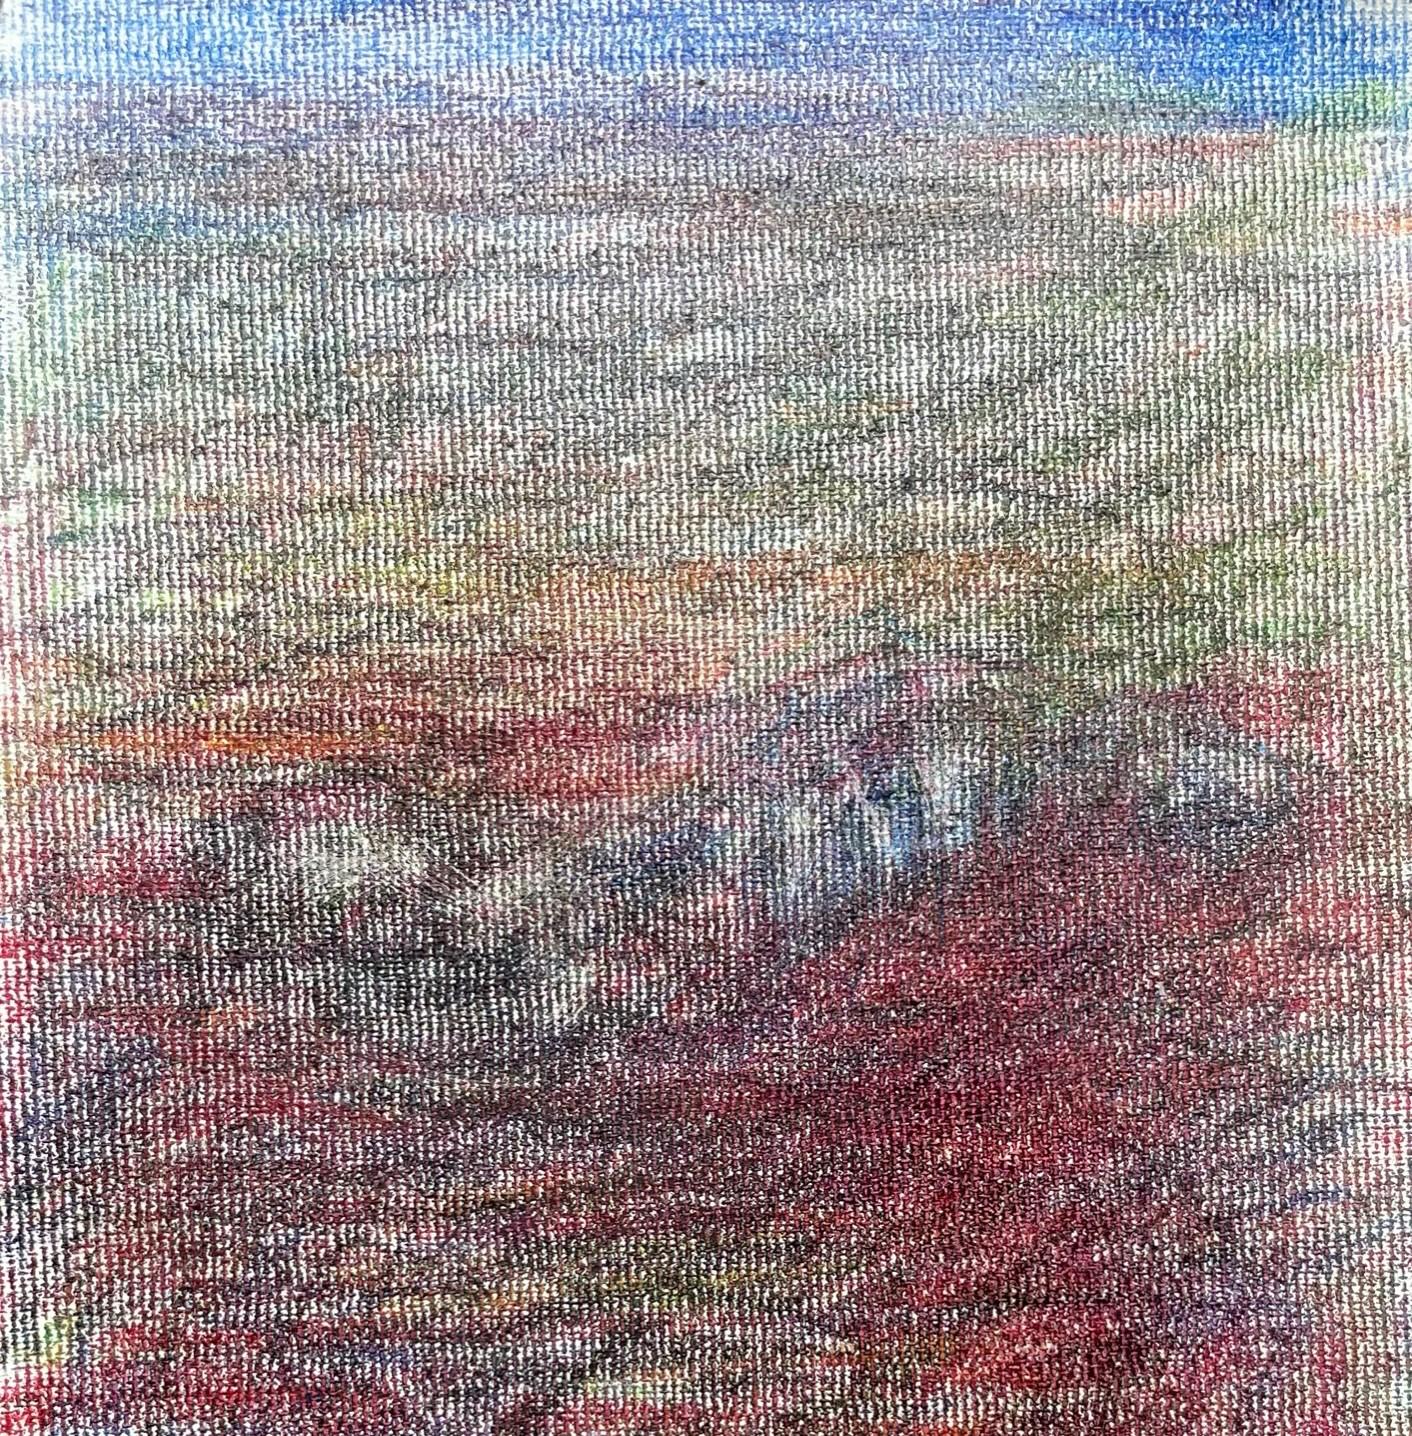 Body in the Field #2 - Red, Blue, Drawing, Coloured Pencils, Landscape - Art by Zsolt Berszán